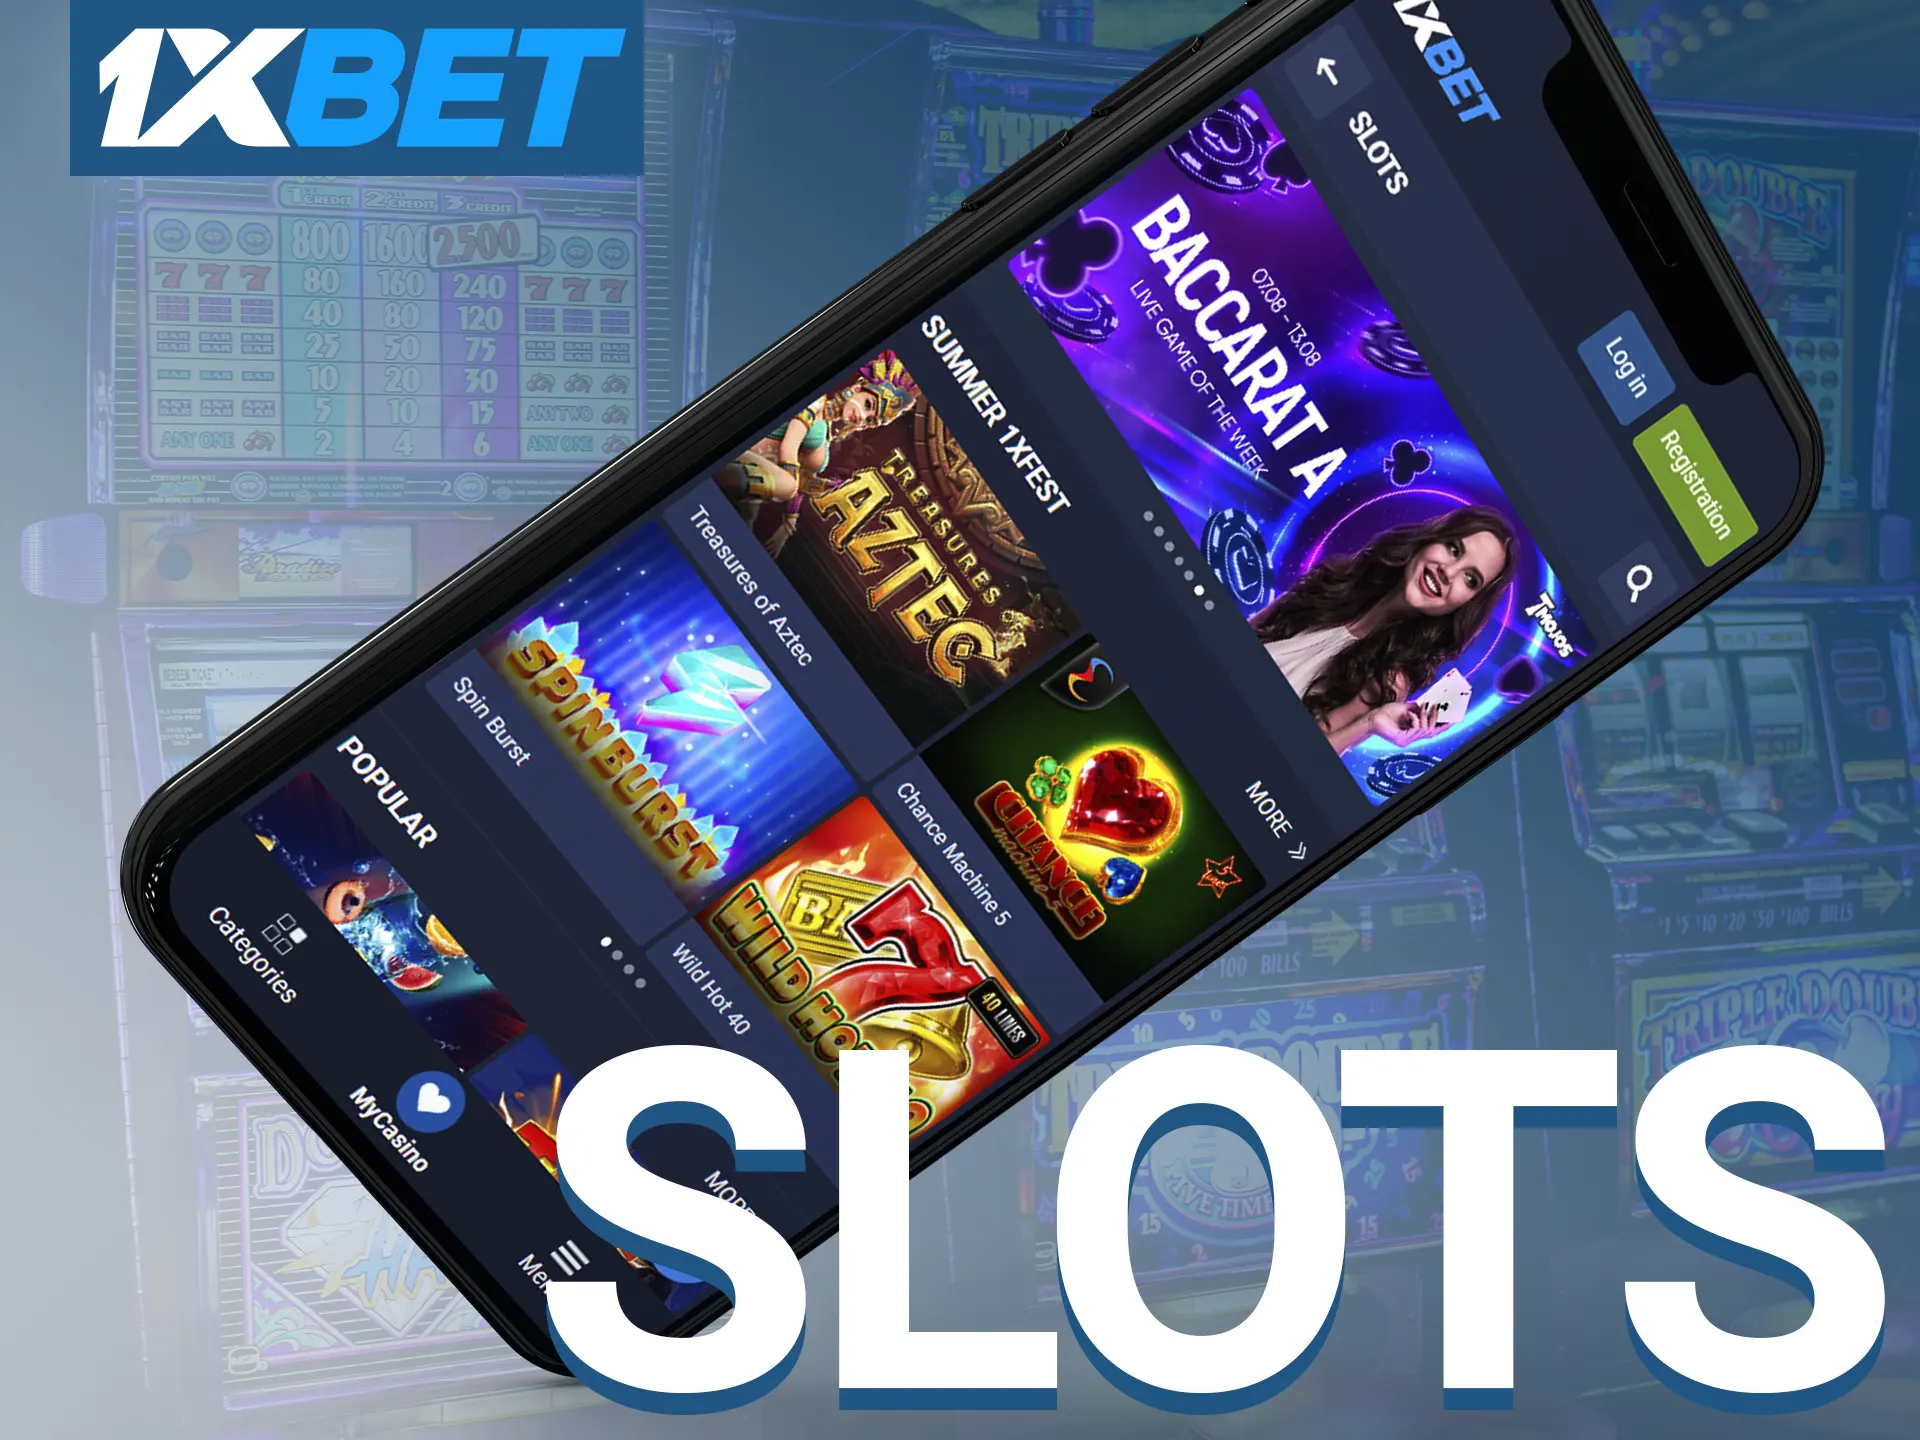 The 1xbet mobile app offers a wide range of slots optimized for mobile devices.